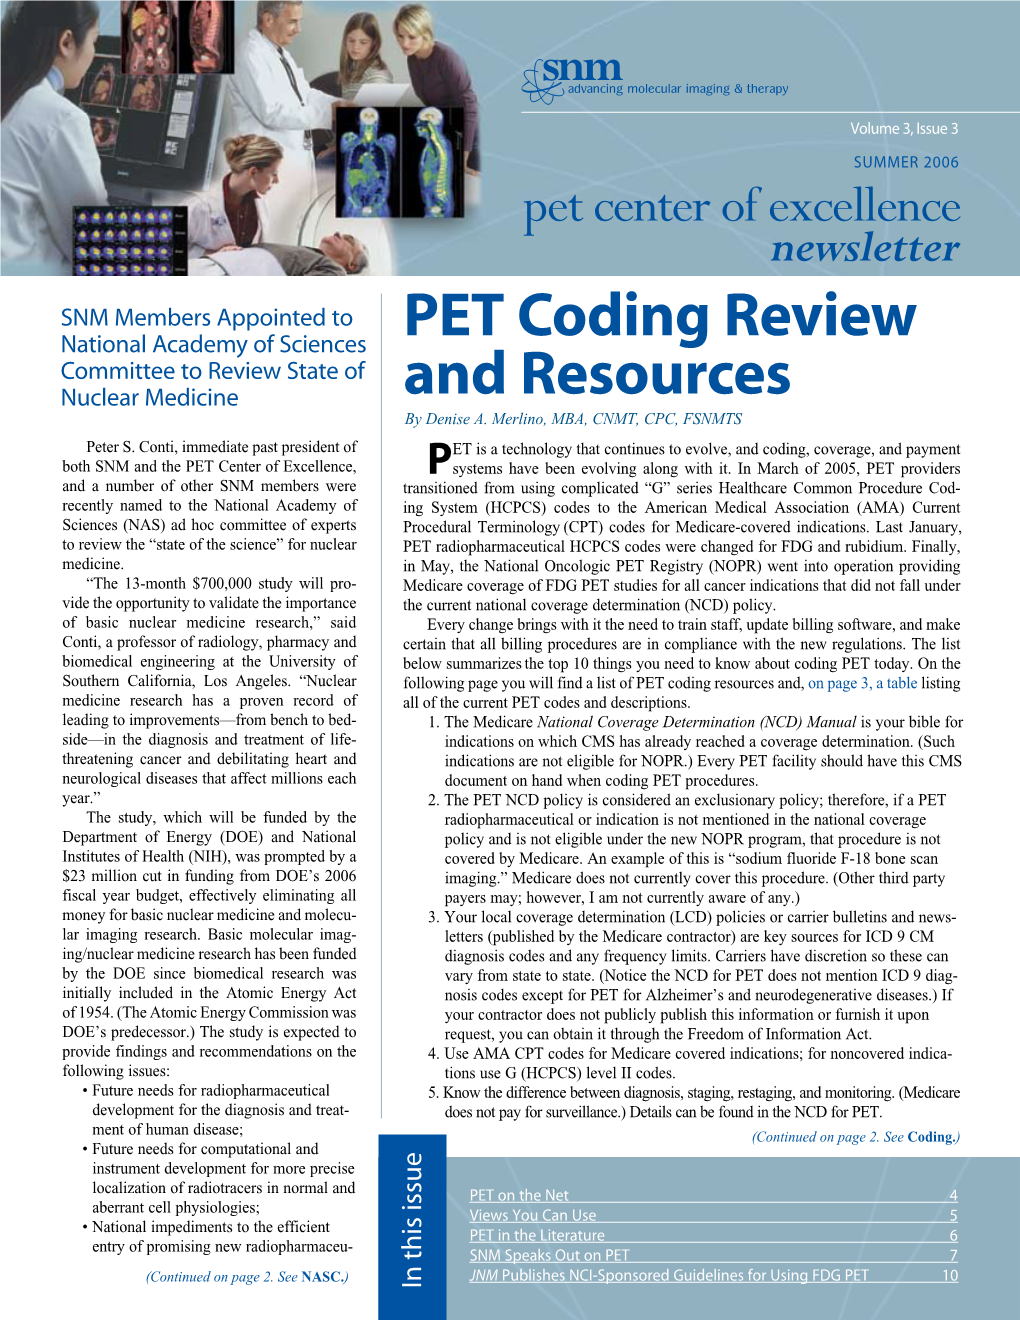 PET Coding Review and Resources